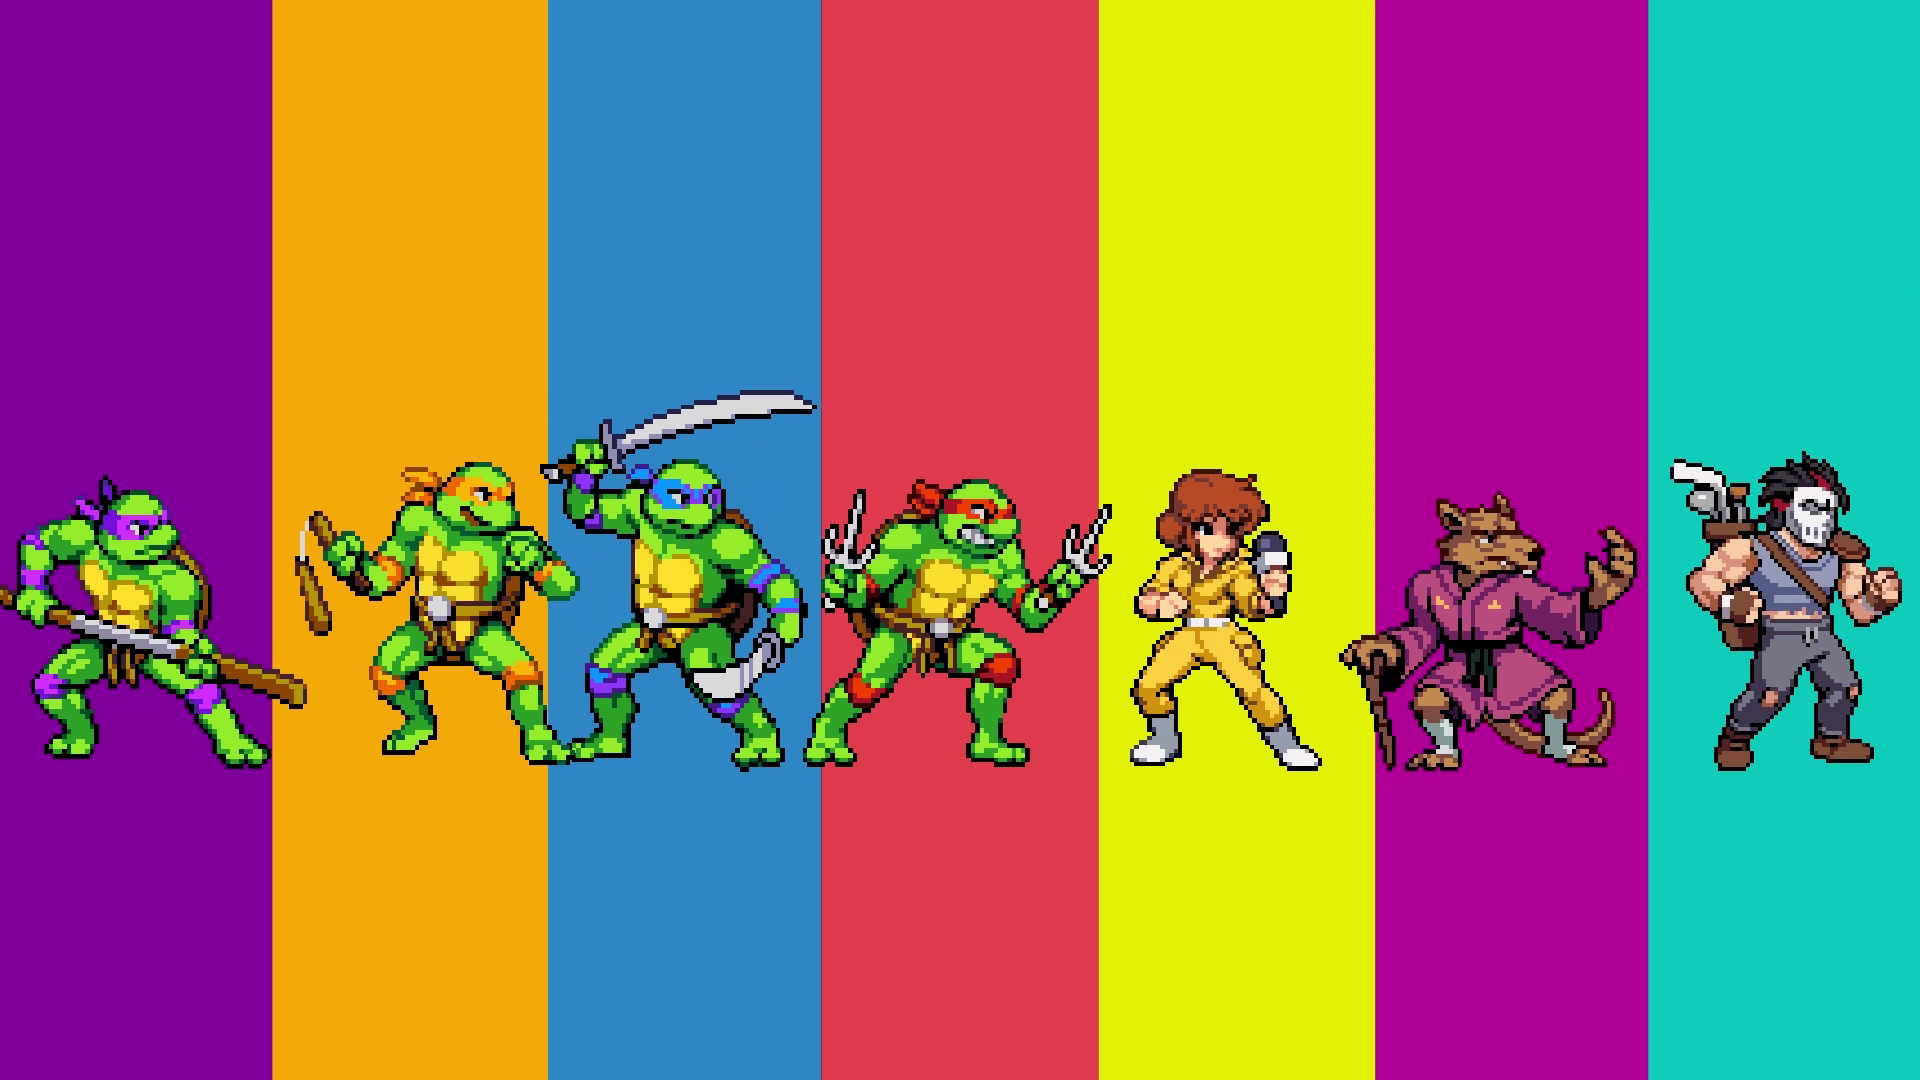 The line-up of playable characters from Teenage Mutant Ninja Turtles: Shredder's Revenge, each standing in front of a horizontal slice of the colour associated with their character